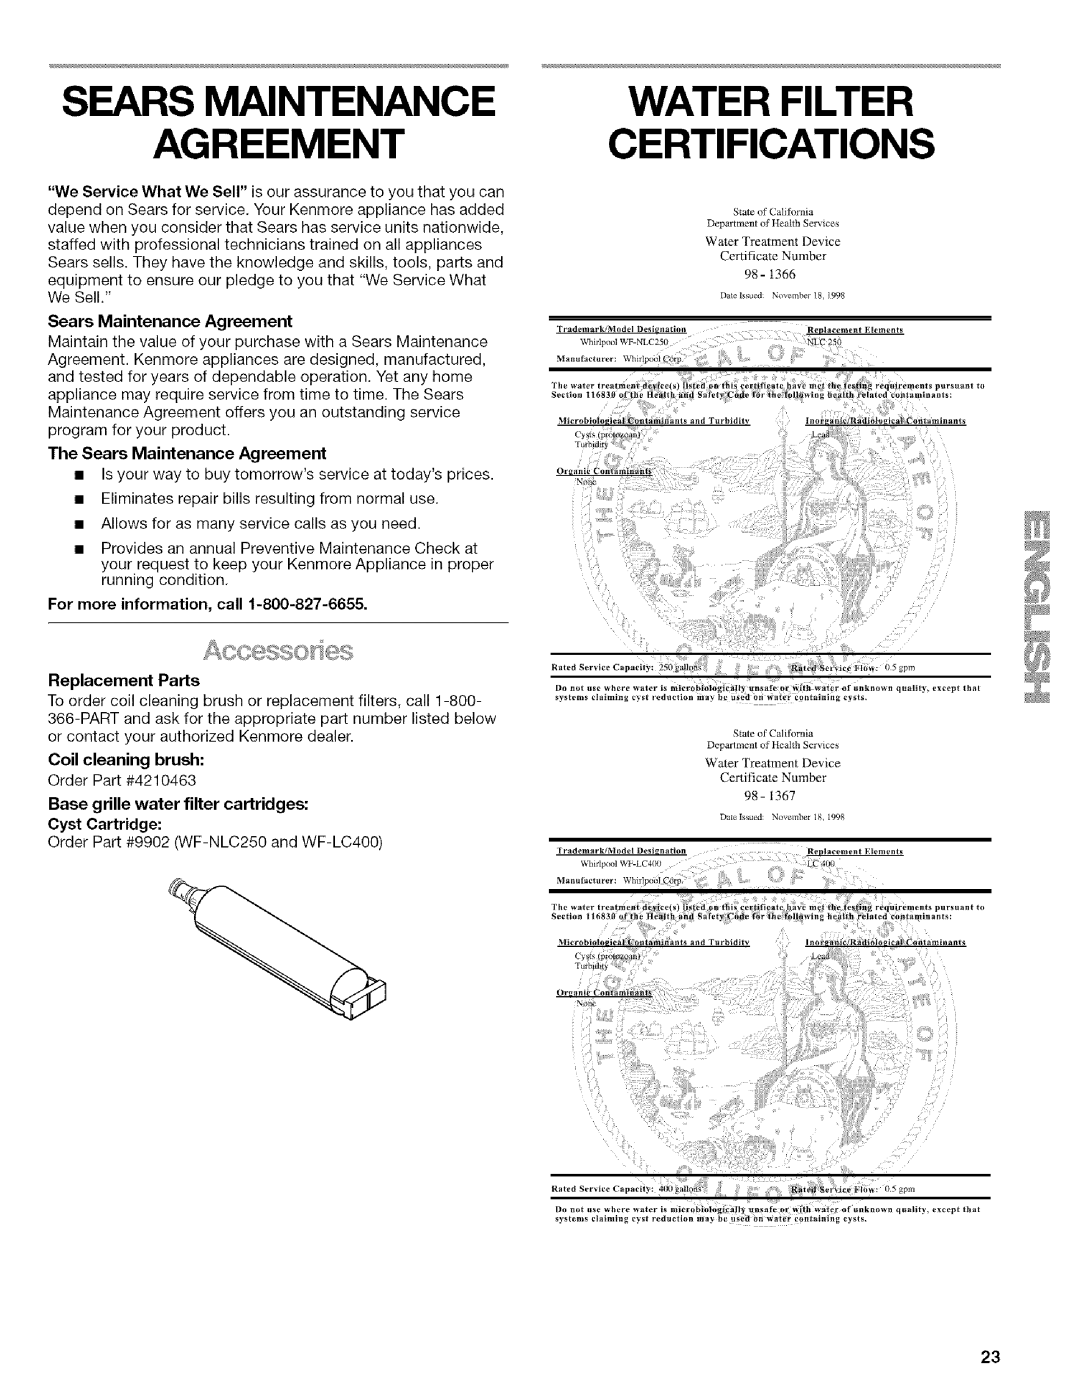 Kenmore 2205960 manual Water Filter Certifications, The Sears Maintenance Agreement, Replacement Parts, Cyst Cartridge 